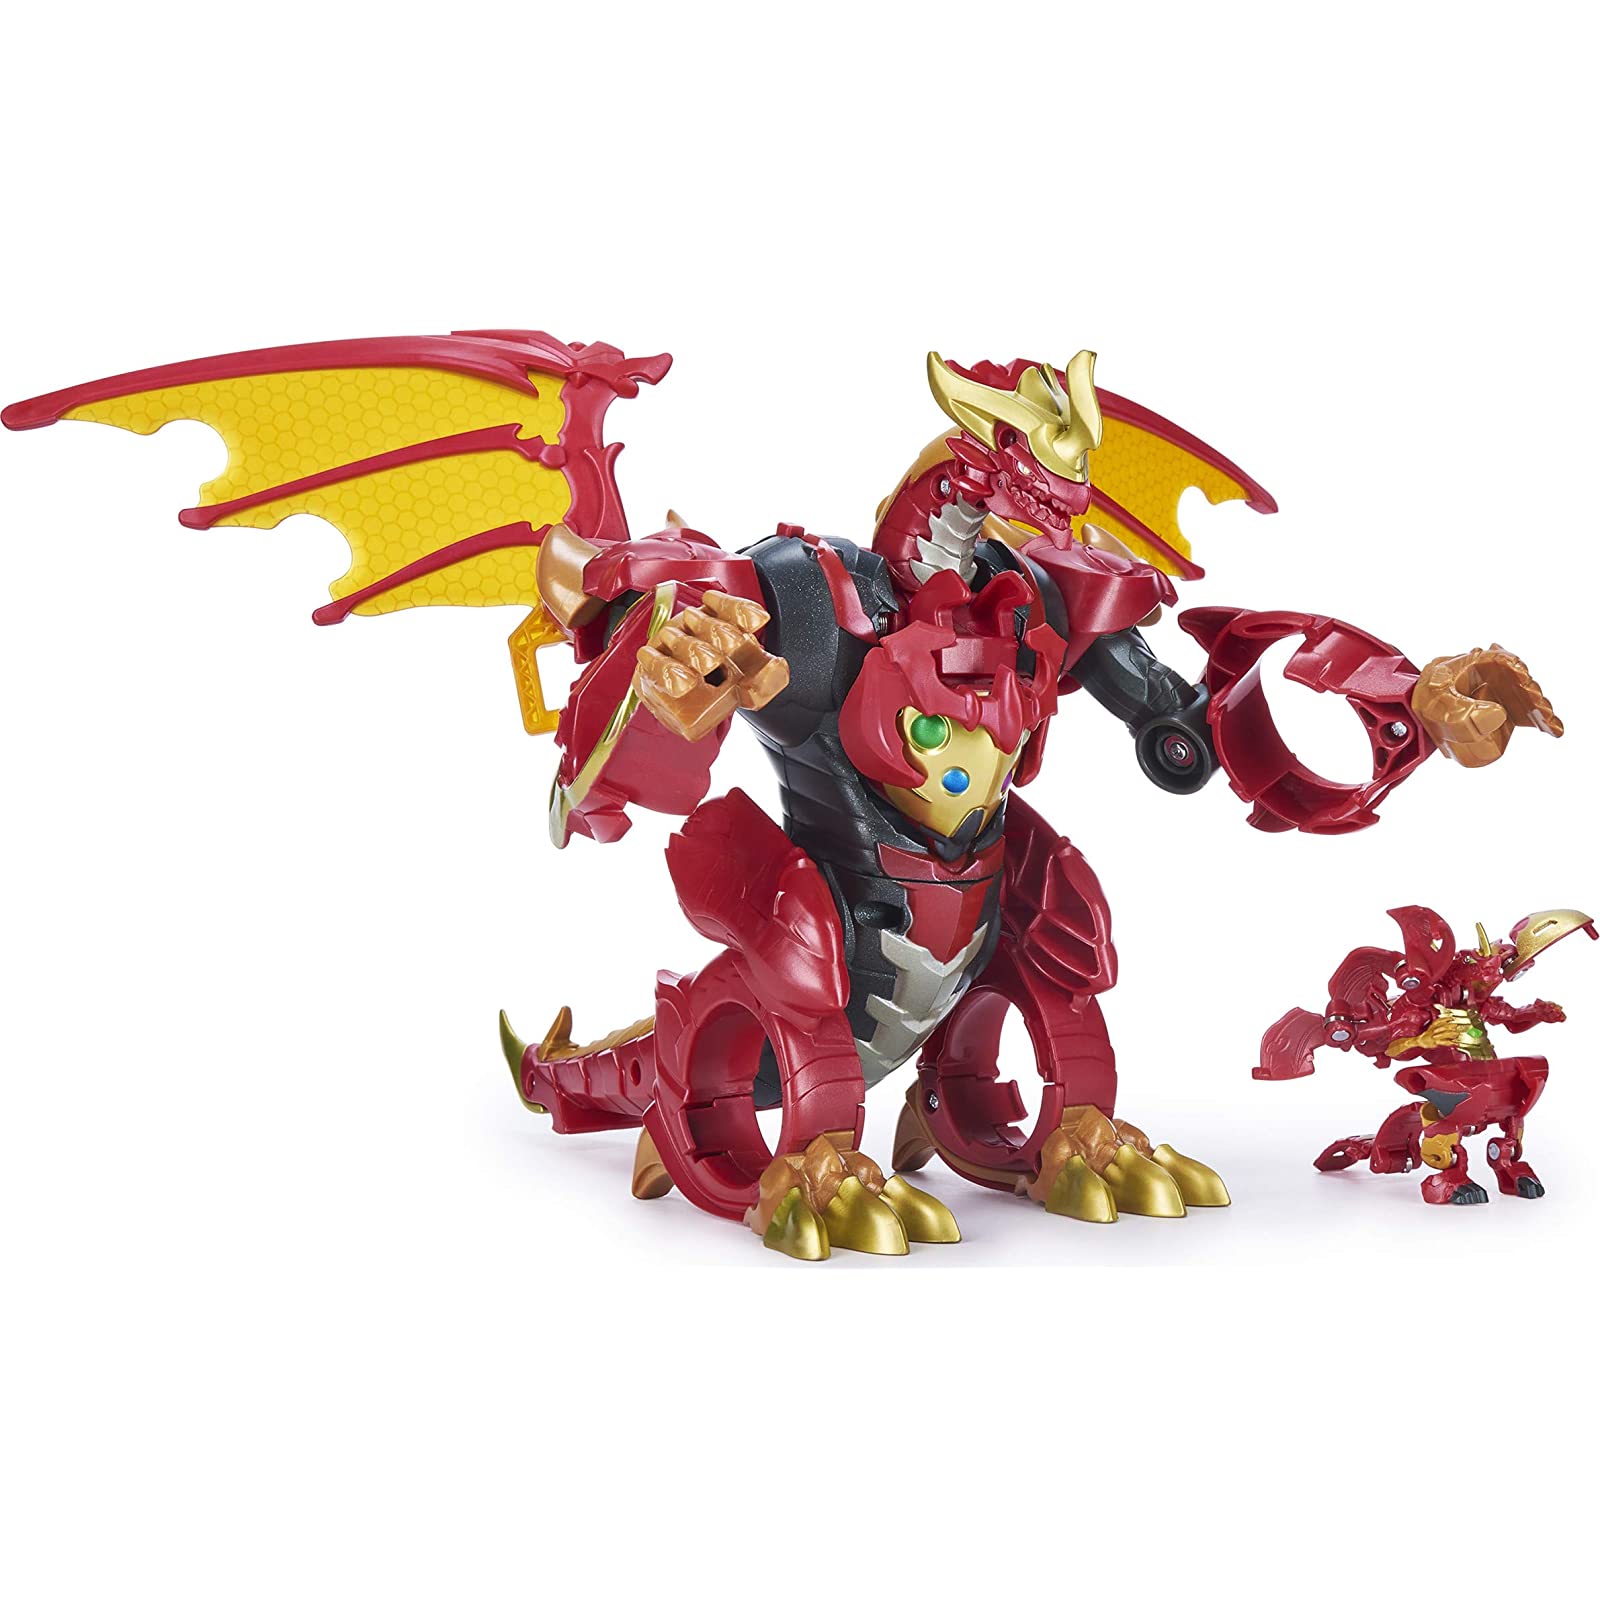 Bakugan, Dragonoid Infinity Transforming Figure with Exclusive Fused Ultra and 10 Baku-Gear Accessories - image 1 of 2